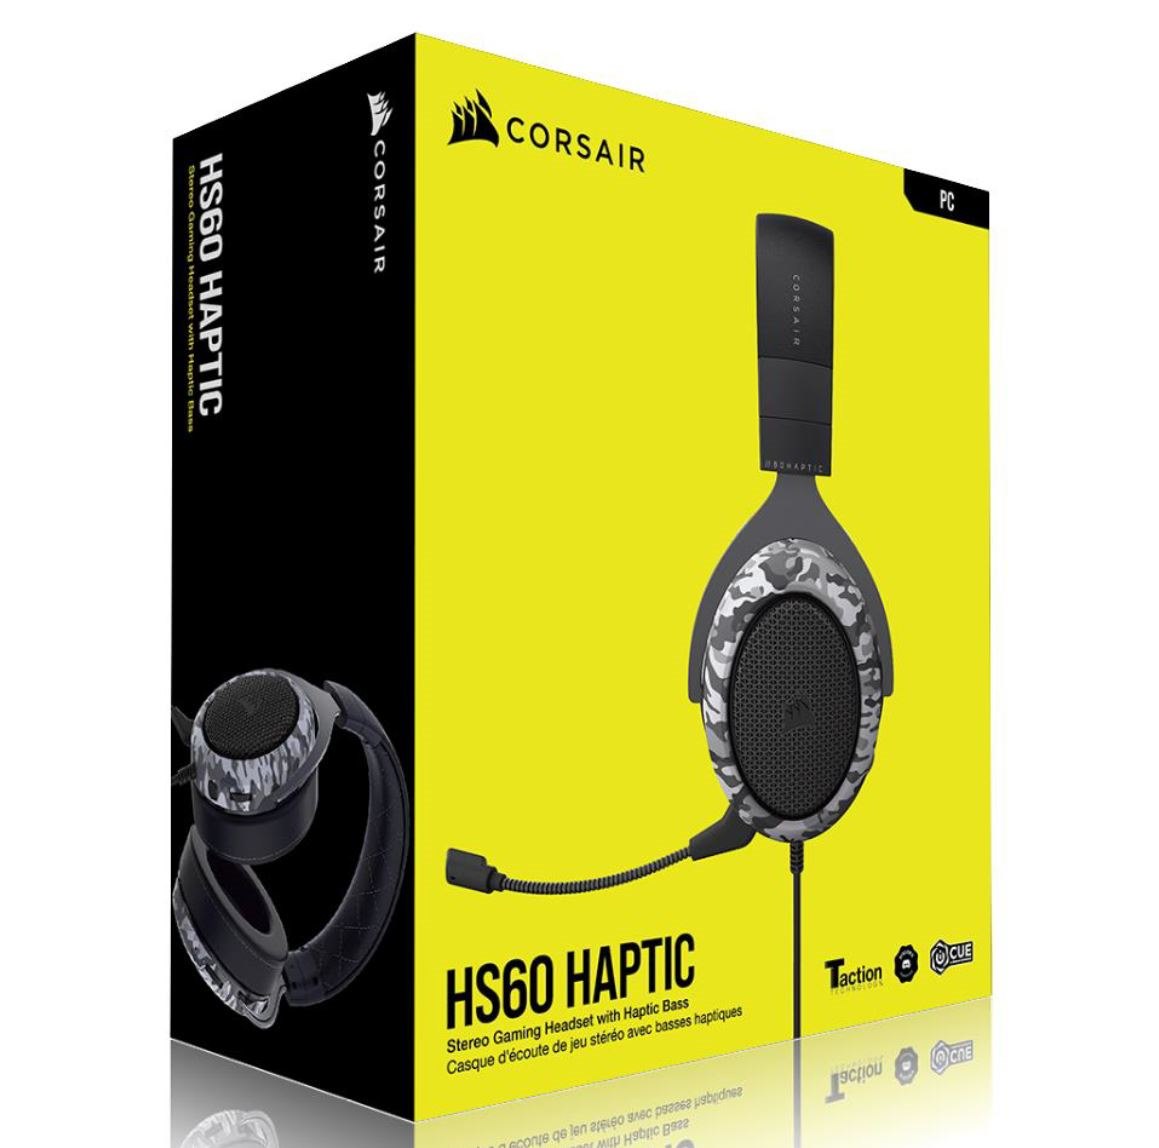 Corsair HS60 Haptic Stereo Gaming Headset With Haptic Bass - Black With Camouflage Black And White Headset Cover